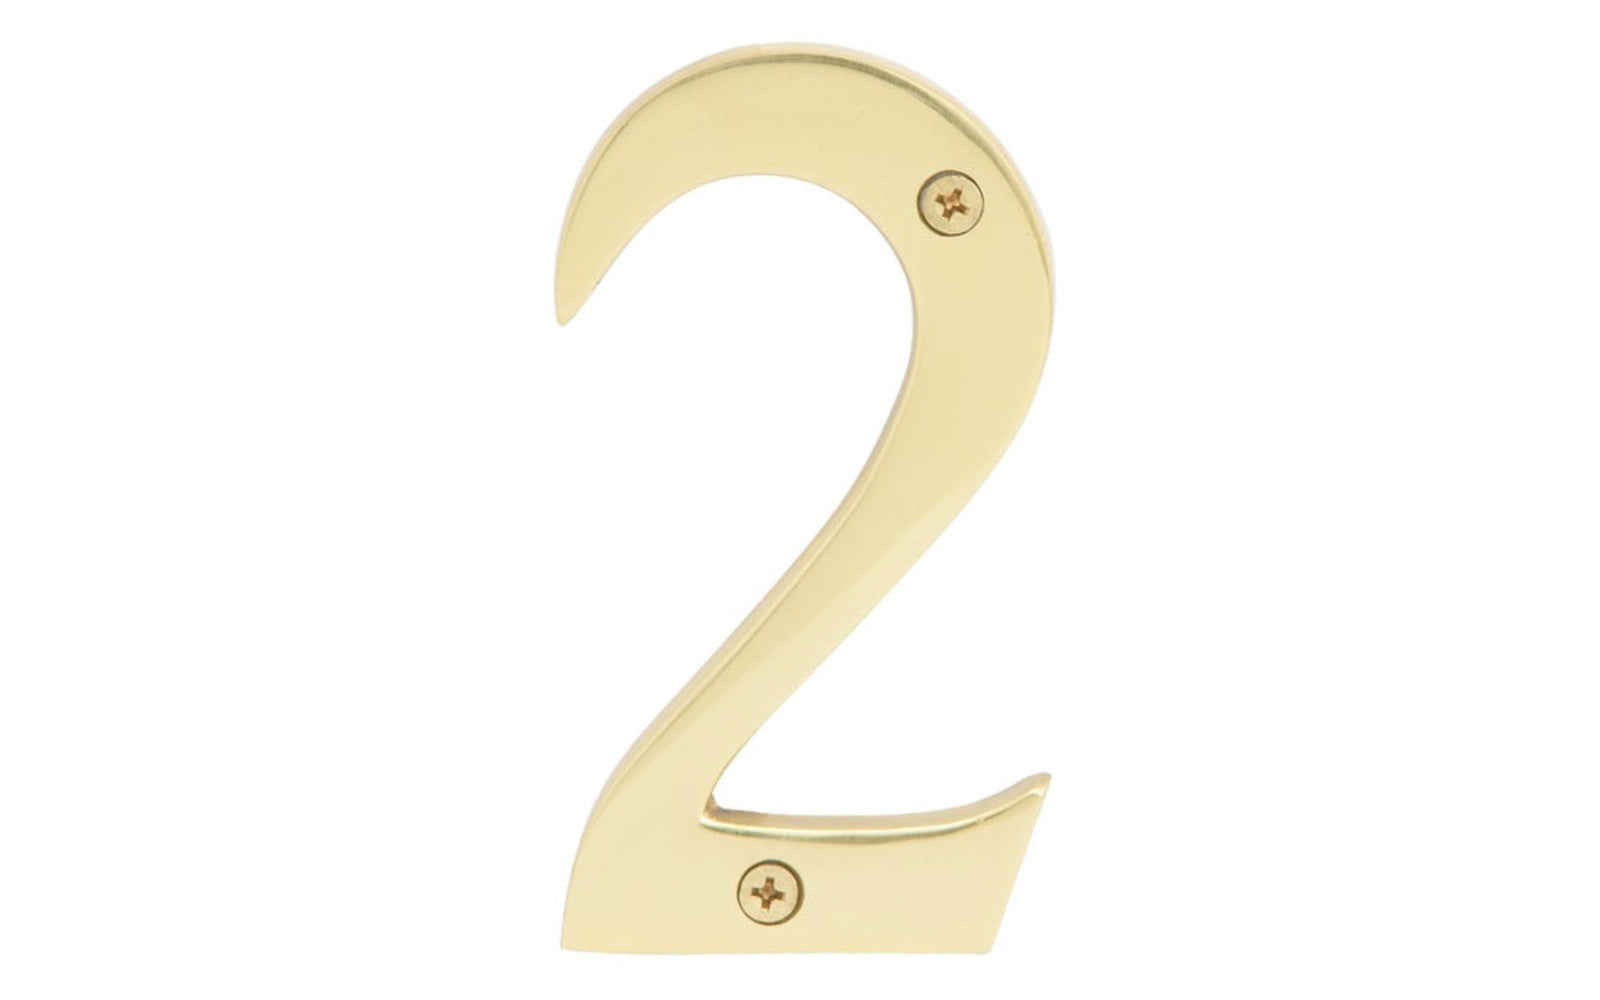 Number Two Solid Brass House Number in a 4" Size. Made of solid brass material - 1/4" thickness. Lacquered brass finish. Includes two flat head phillips screws. #2 House Number. Hy-Ko Model No. BR-90/2. 029069104924